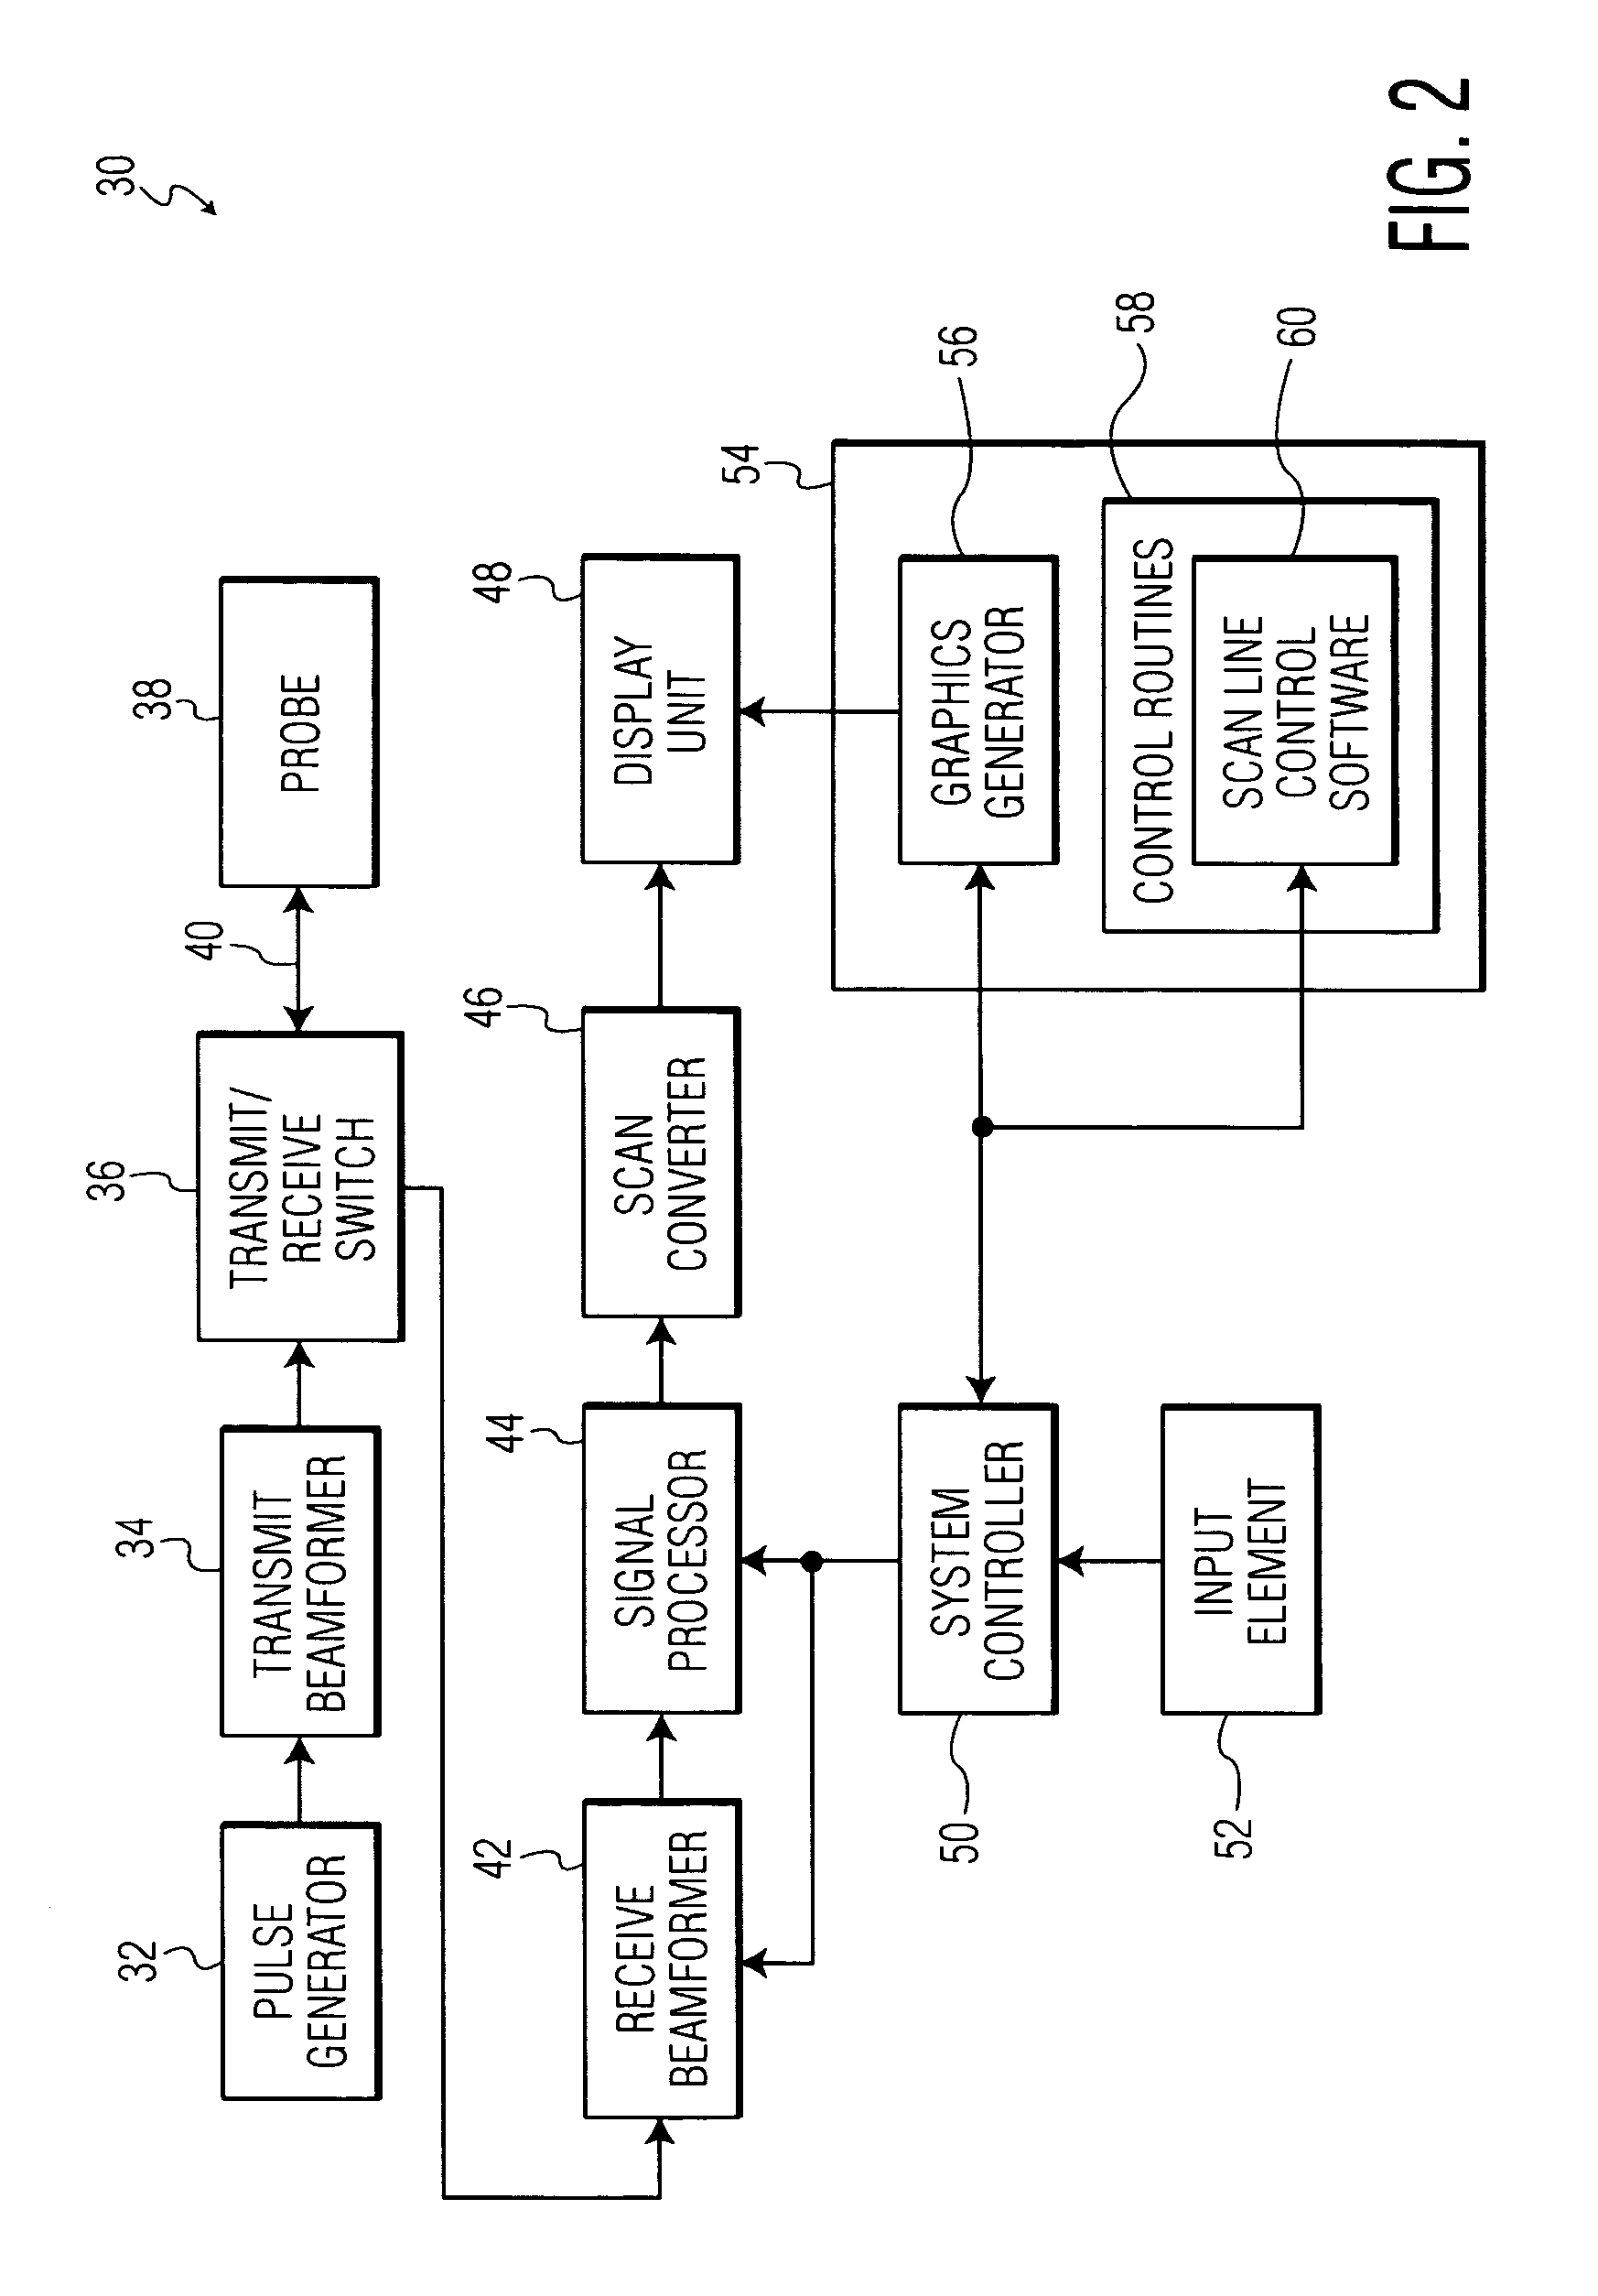 Ultrasound diagnostic imaging system and method for 3D qualitative display of 2D border tracings